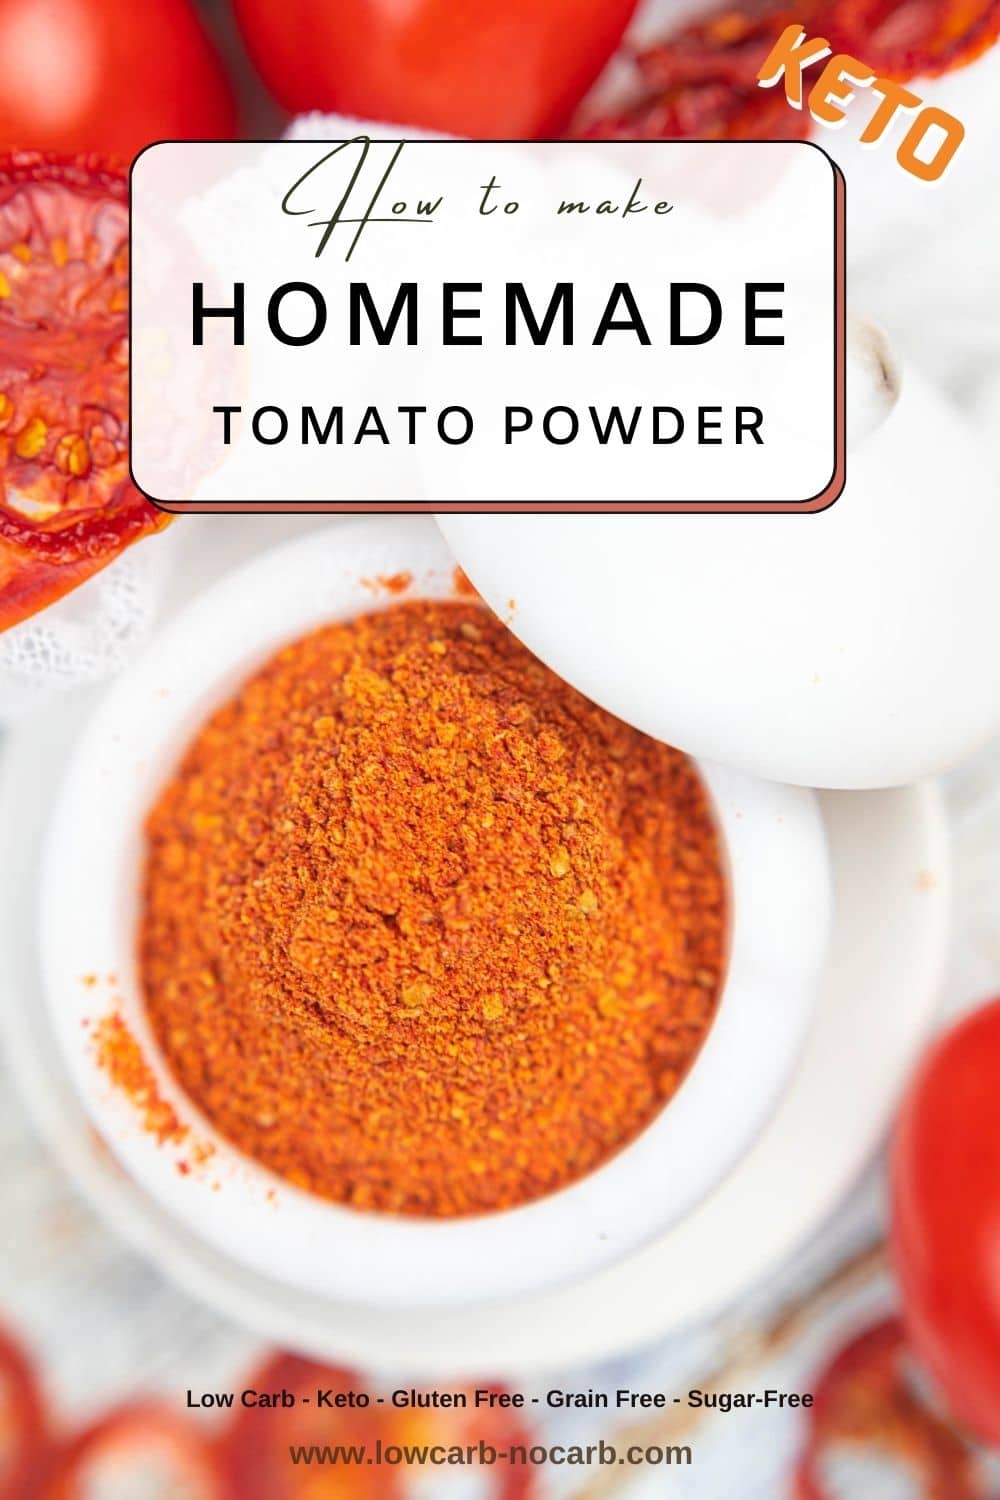 Homemade tomato powder, labeled "keto" with an image of red tomatoes and golden tomato powder in a white bowl.